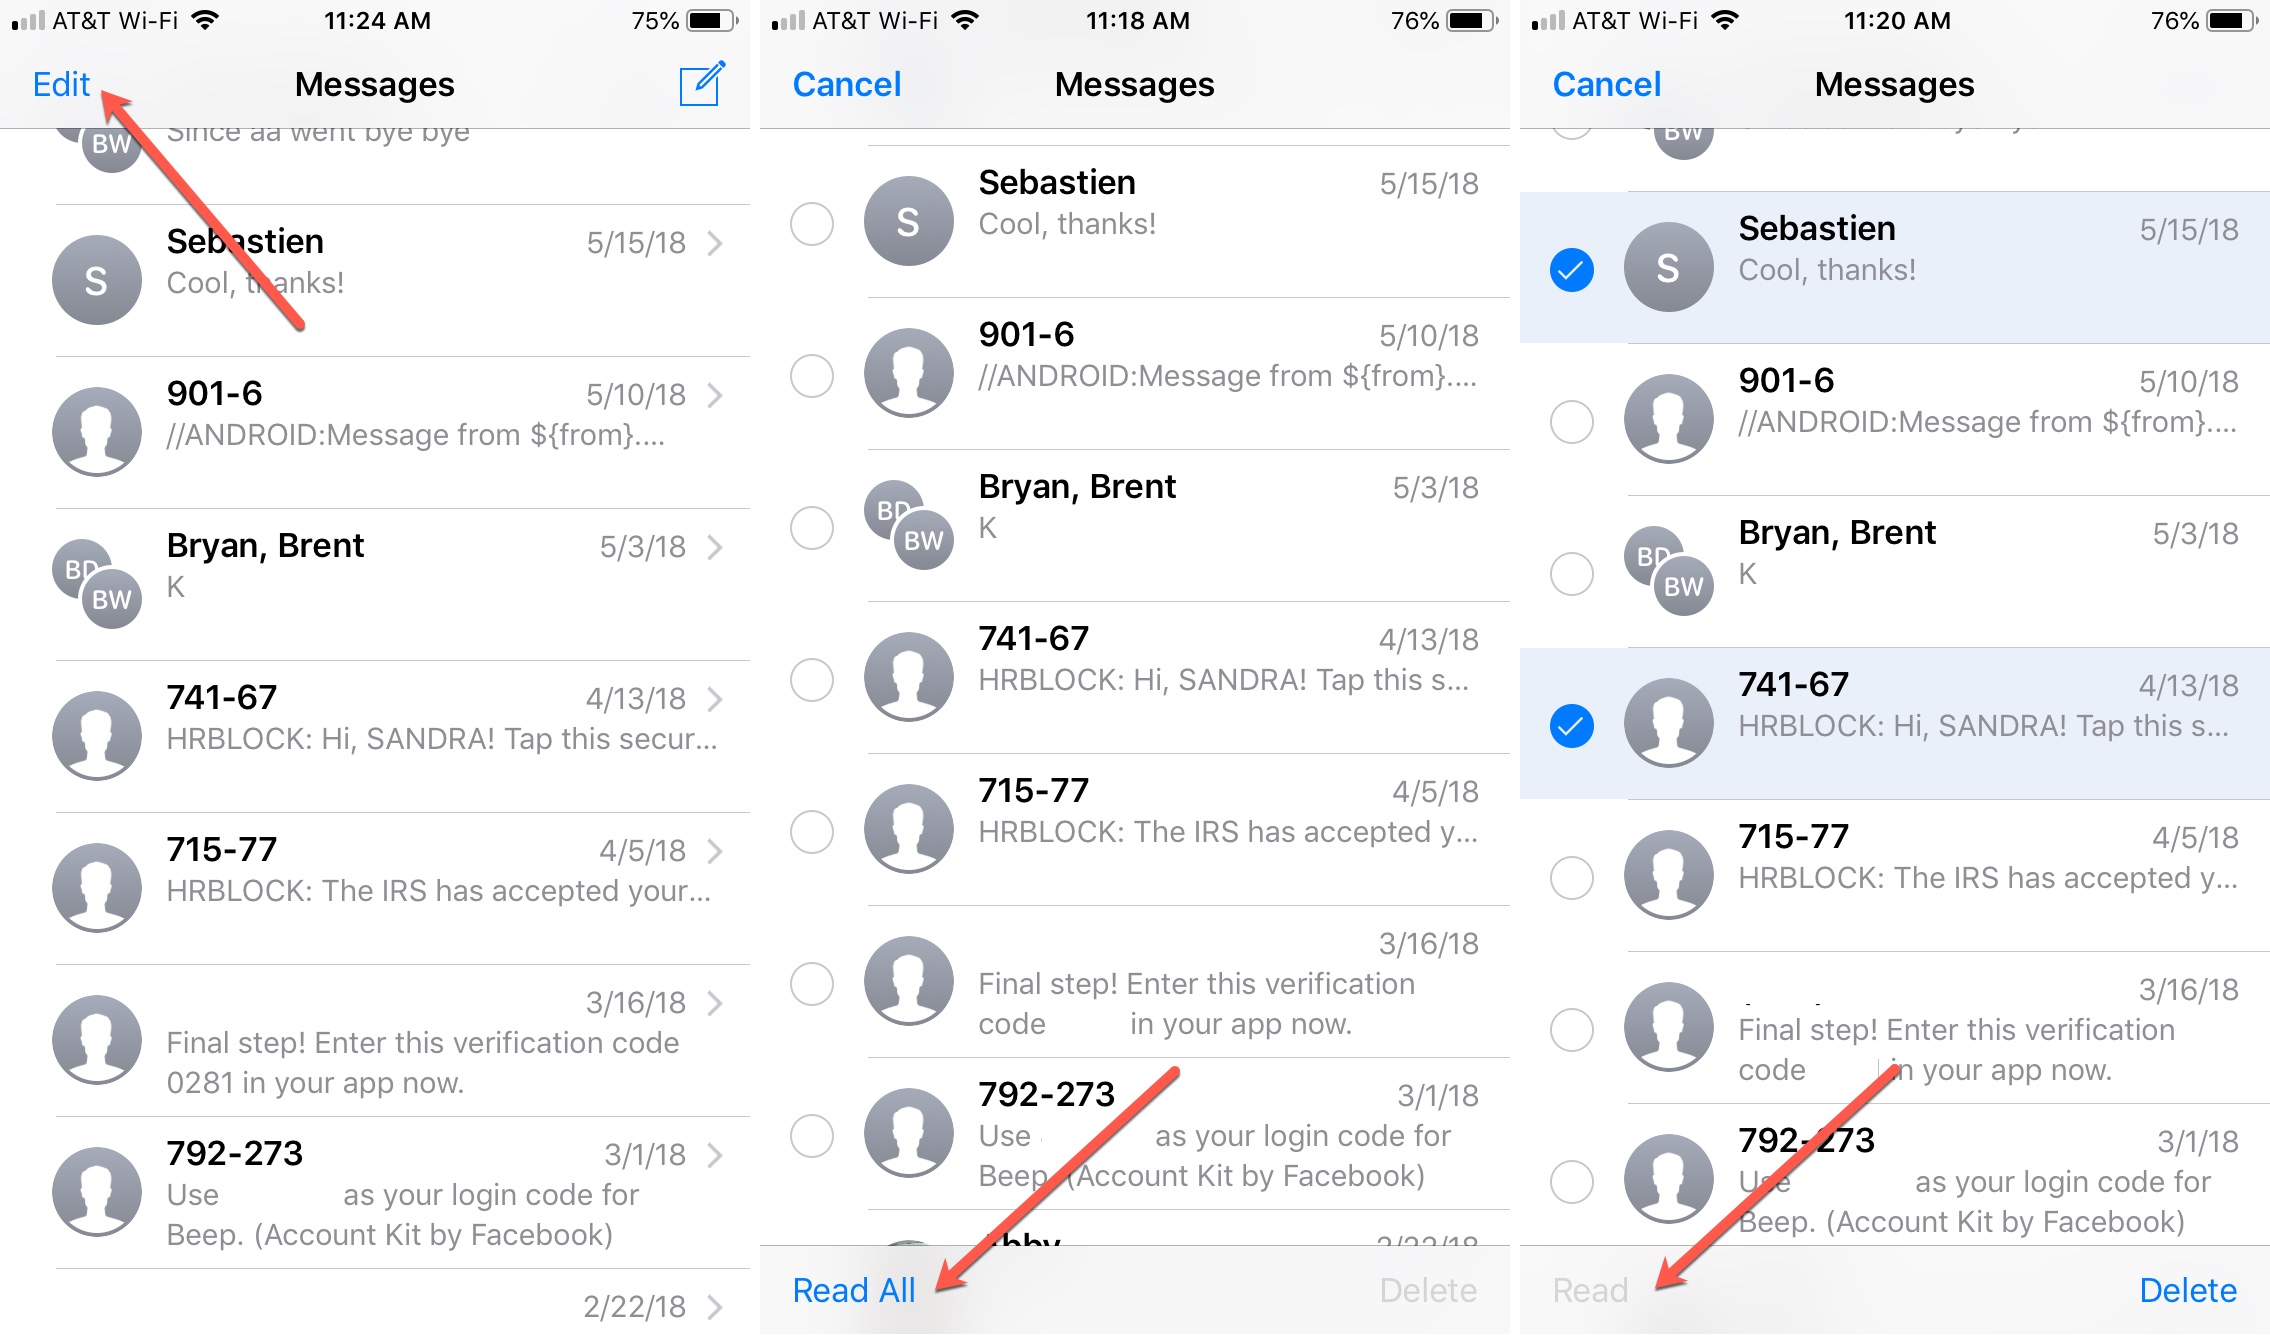 How to mark all conversations as Read in the Messages app ...